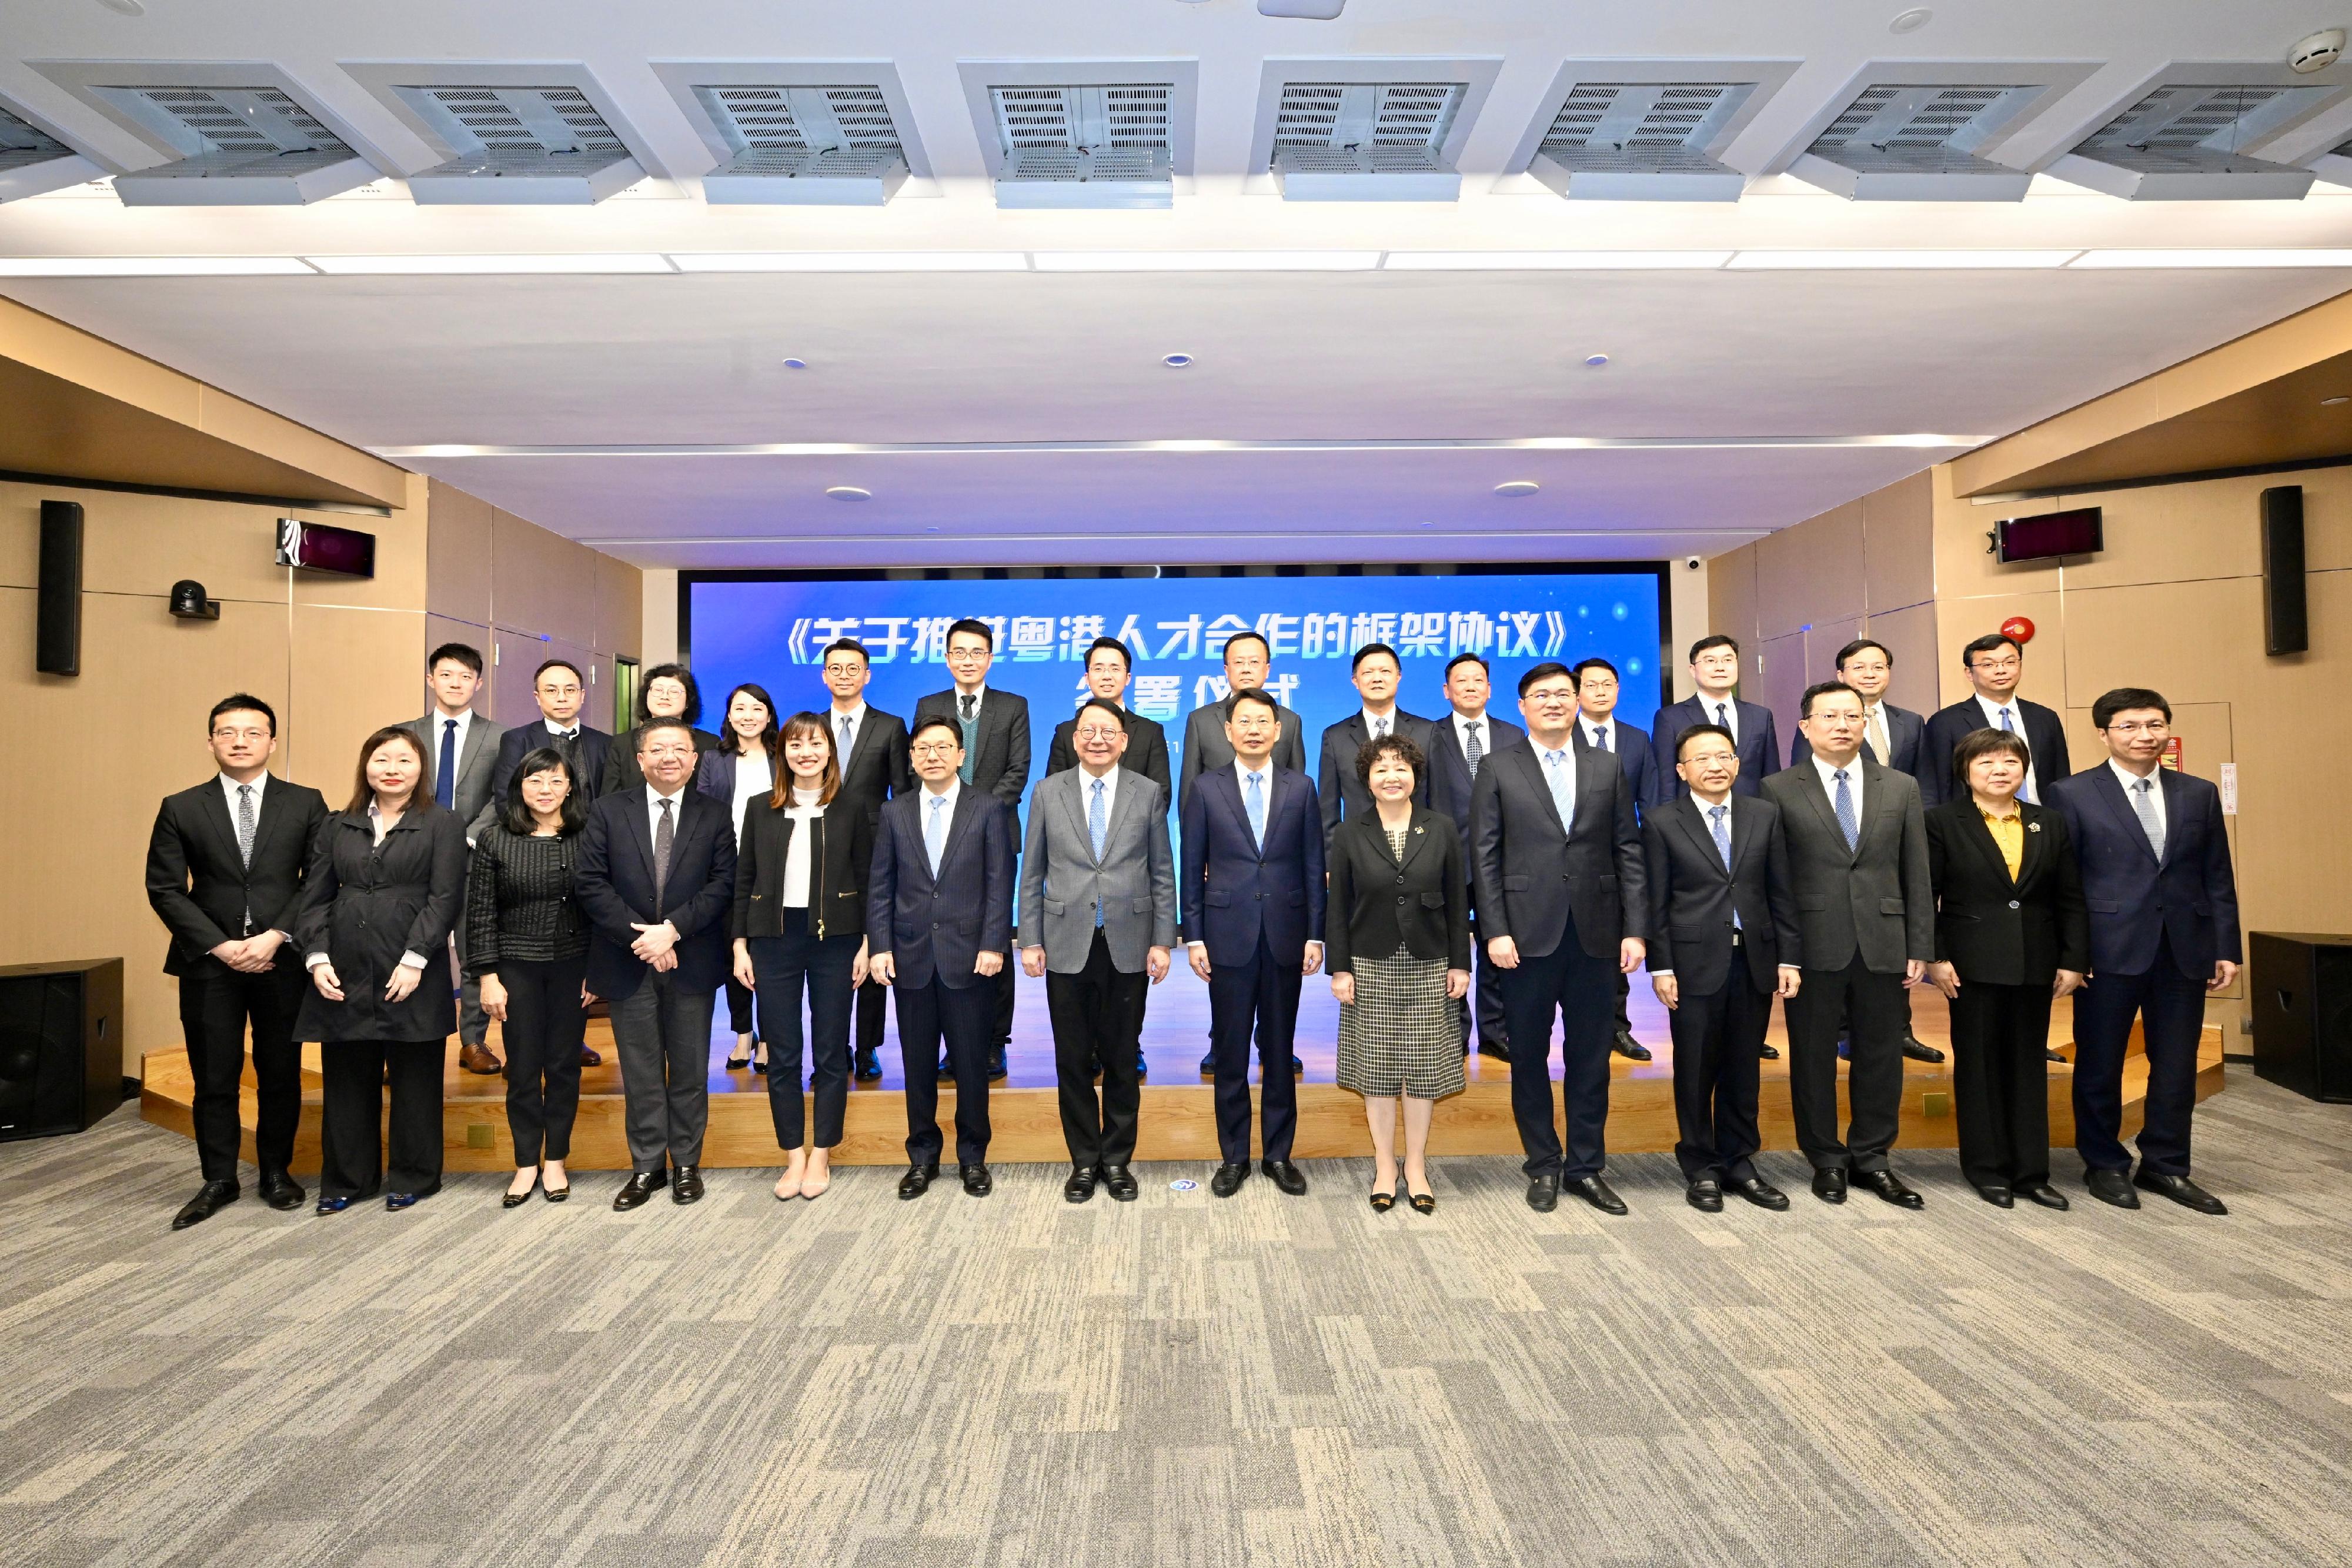 The Chief Secretary for Administration, Mr Chan Kwok-ki, arrived in Guangzhou today (January 8) to begin his visit to Mainland cities of the Guangdong-Hong Kong-Macao Greater Bay Area. Photo shows (front row, from fifth left) the Under Secretary for Innovation, Technology and Industry, Ms Lillian Cheong; the Secretary for Labour and Welfare, Mr Chris Sun; Mr Chan; Standing Committee member, the Director of the Organization Department, and the Director of the Talent Work Leading Group Office of the CPC Guangdong Provincial Committee, Mr Cheng Fubo; and the Director General of the Hong Kong and Macao Affairs Office of the People's Government of Guangdong Province, Ms Li Huanchun after the signing of a framework agreement on promoting Guangdong-Hong Kong talent co-operation.